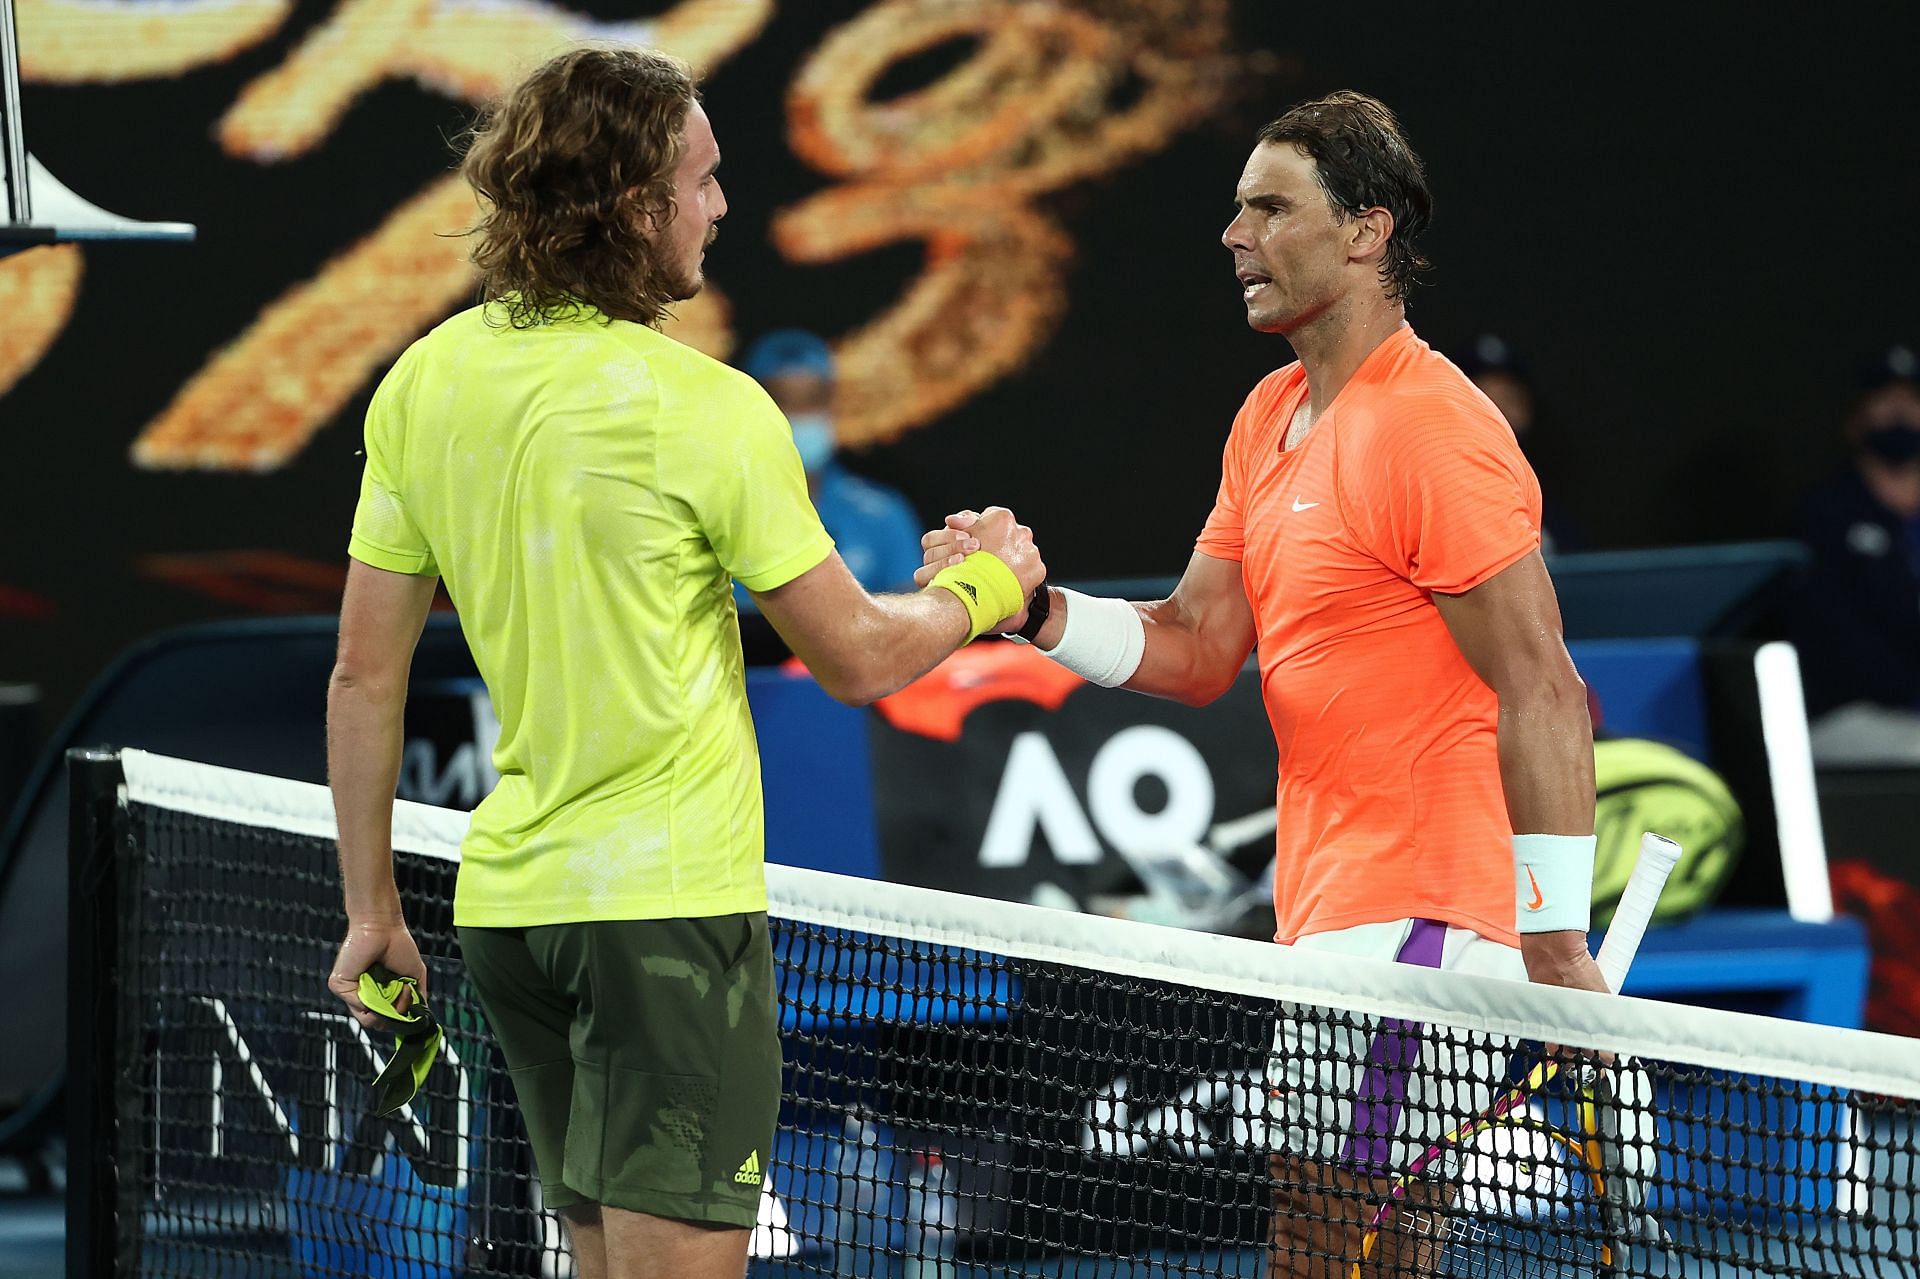 Rafael Nadal squandered a two-set lead in his defeat to Stefanos Tsitsipas in the quarterfinals of the 2021 Australian Open